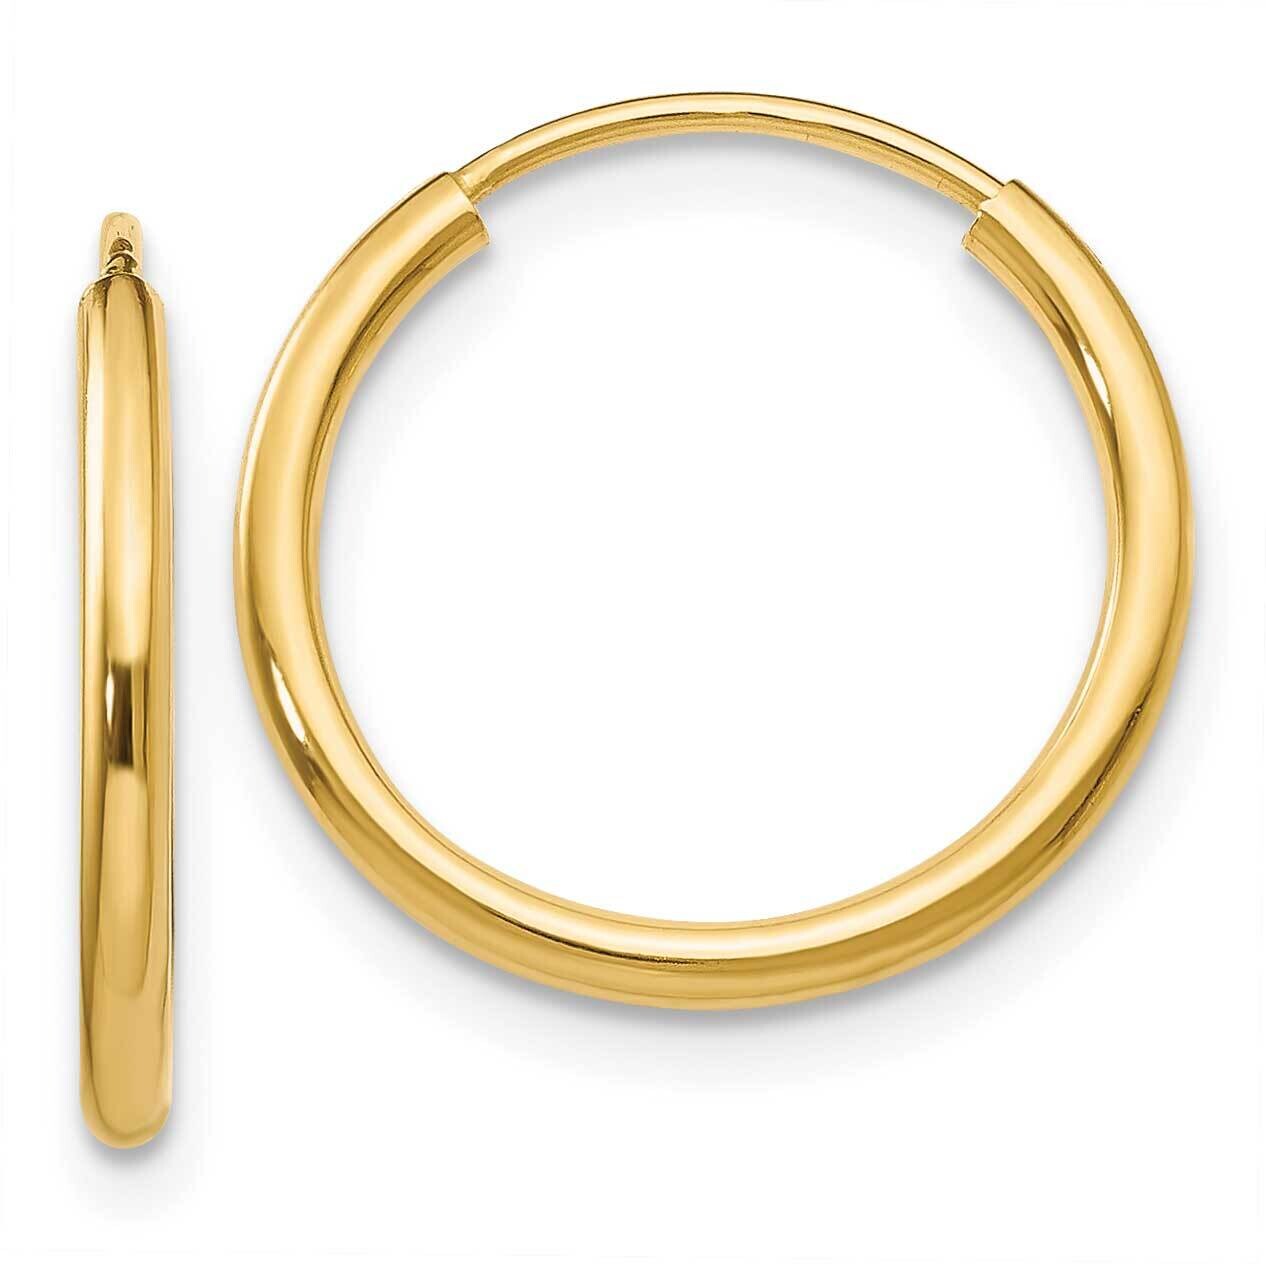 1.5mm Polished Round Endless Hoop Earrings 10k Gold 10XY1158